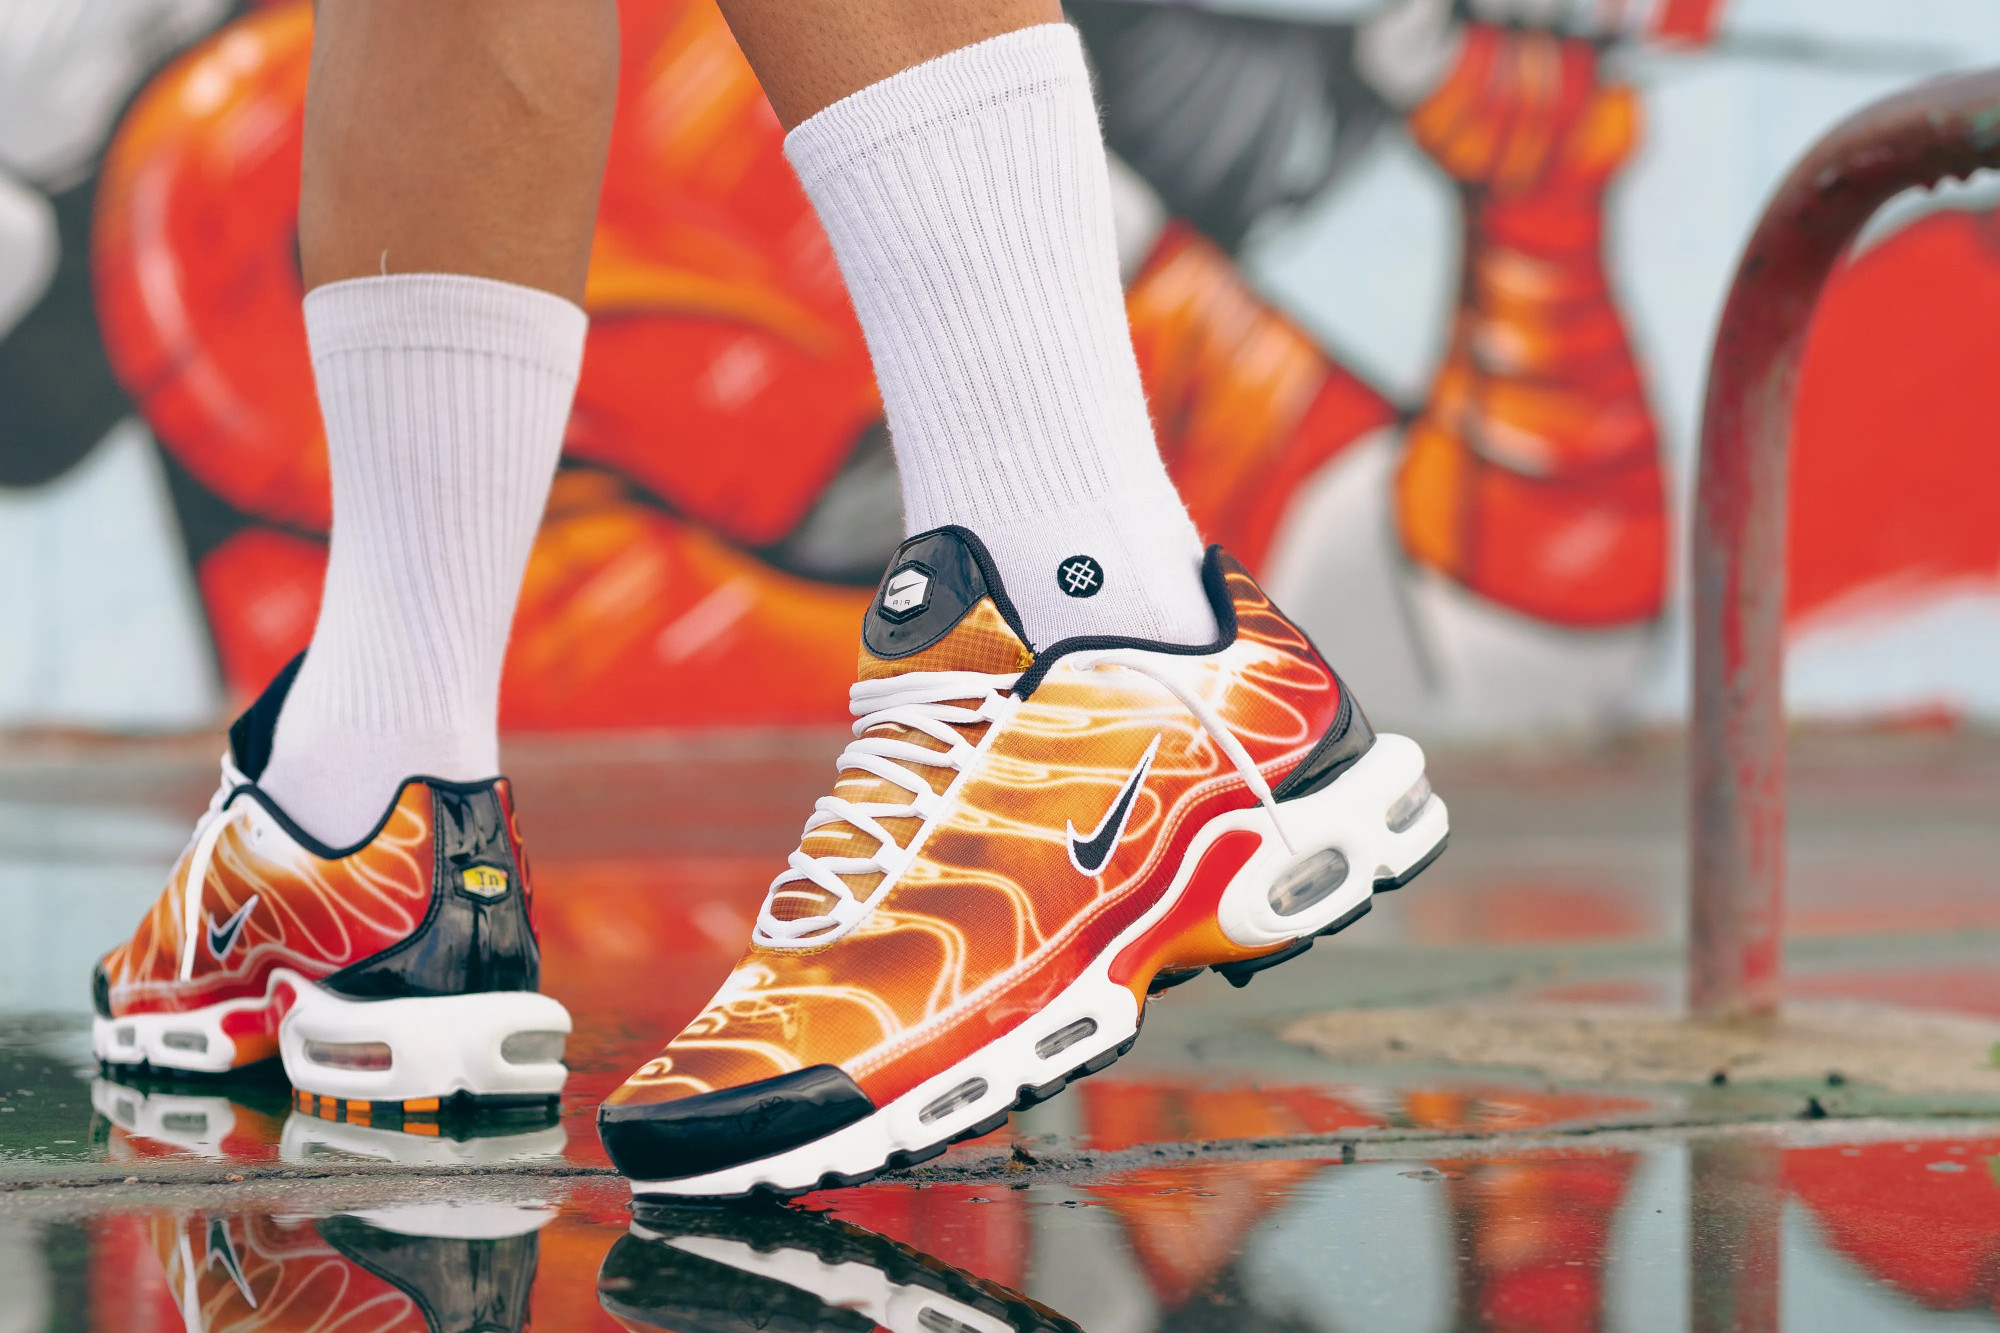 Nike Air Max Plus 'Light Photography' closer look